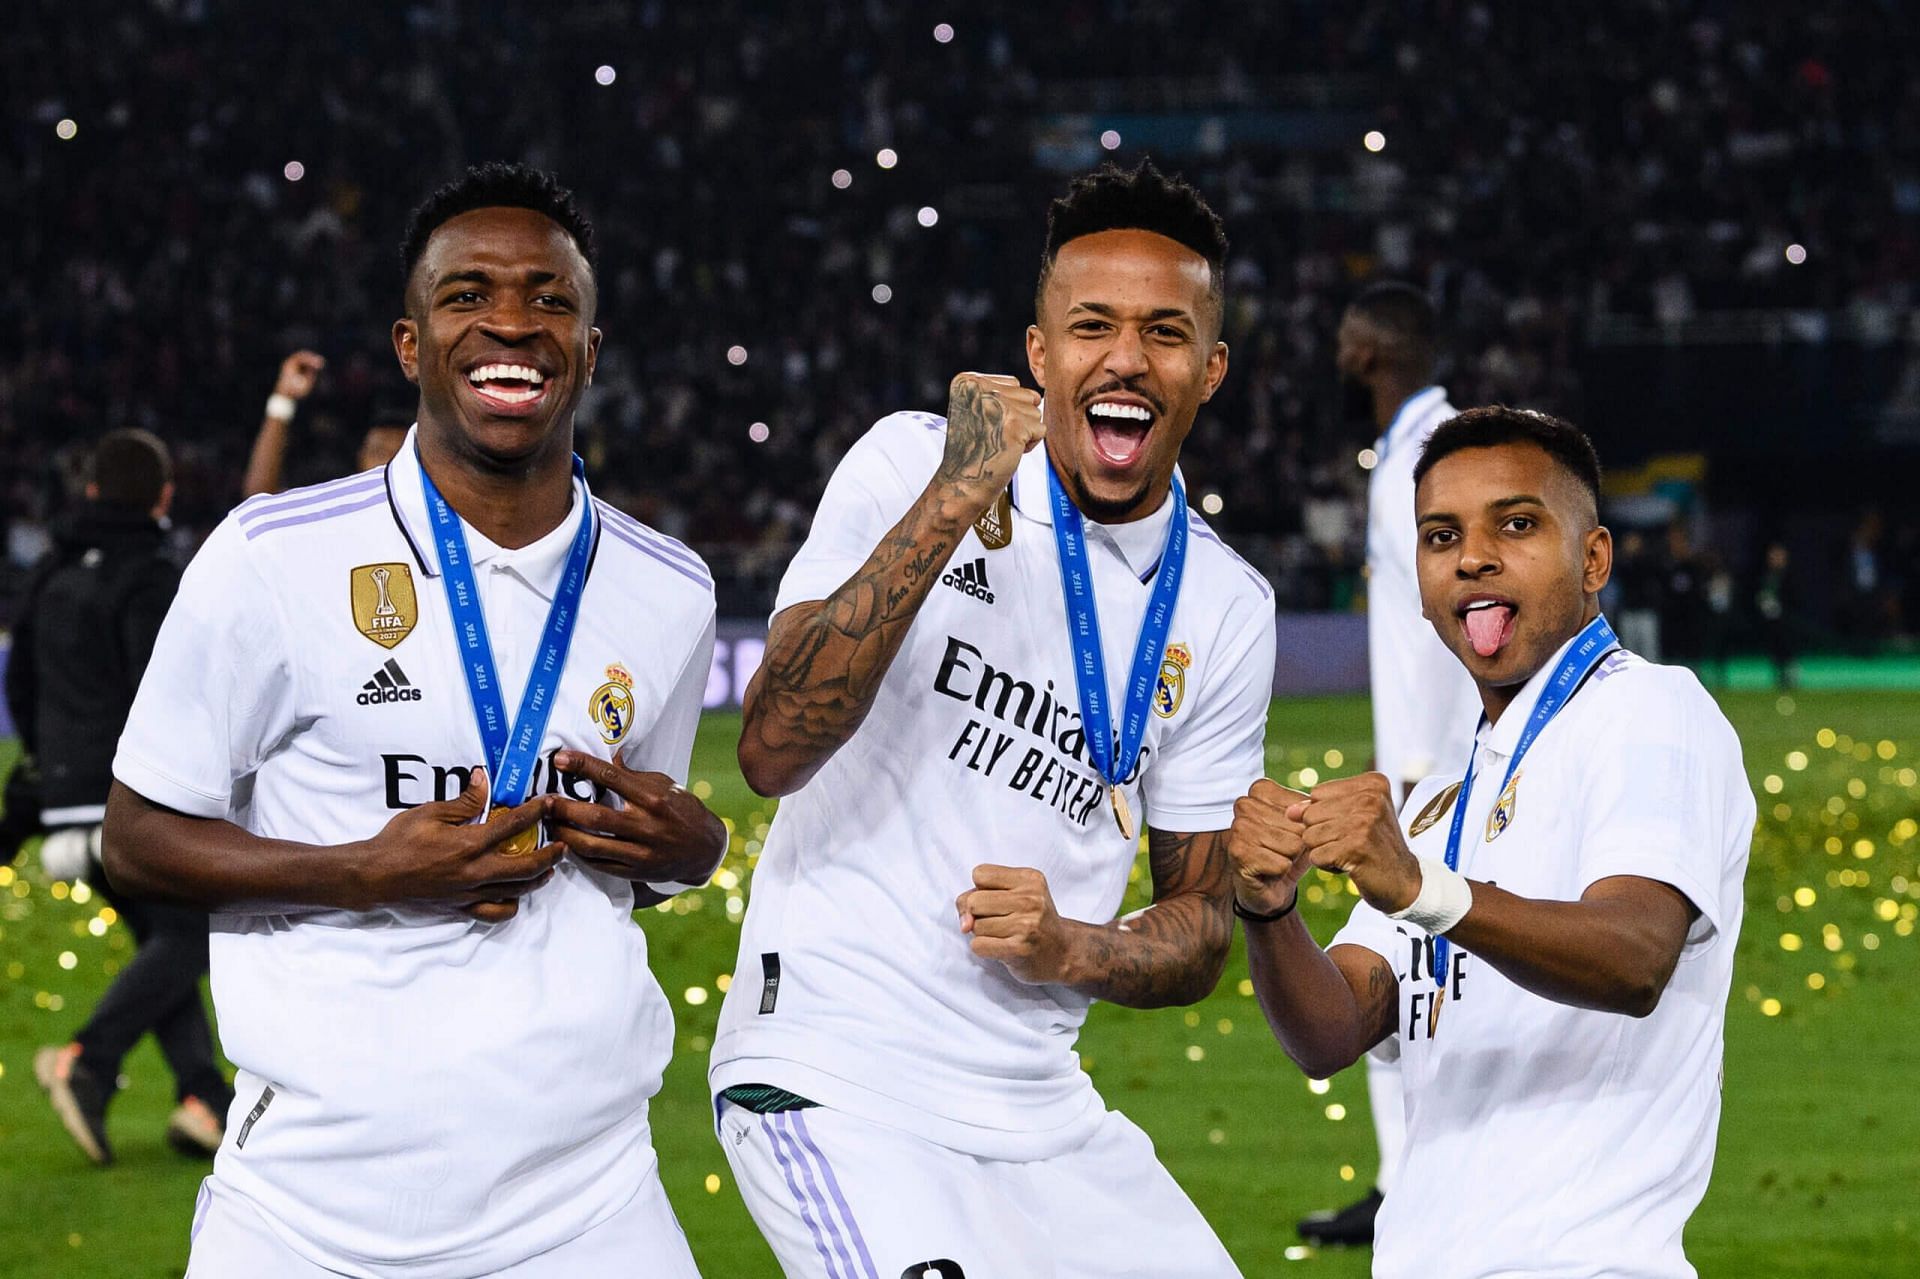 (L-R) The Brazilian Trio of Vinicius, Militao, and Rodrygo after winning the club World Cup in 2022.